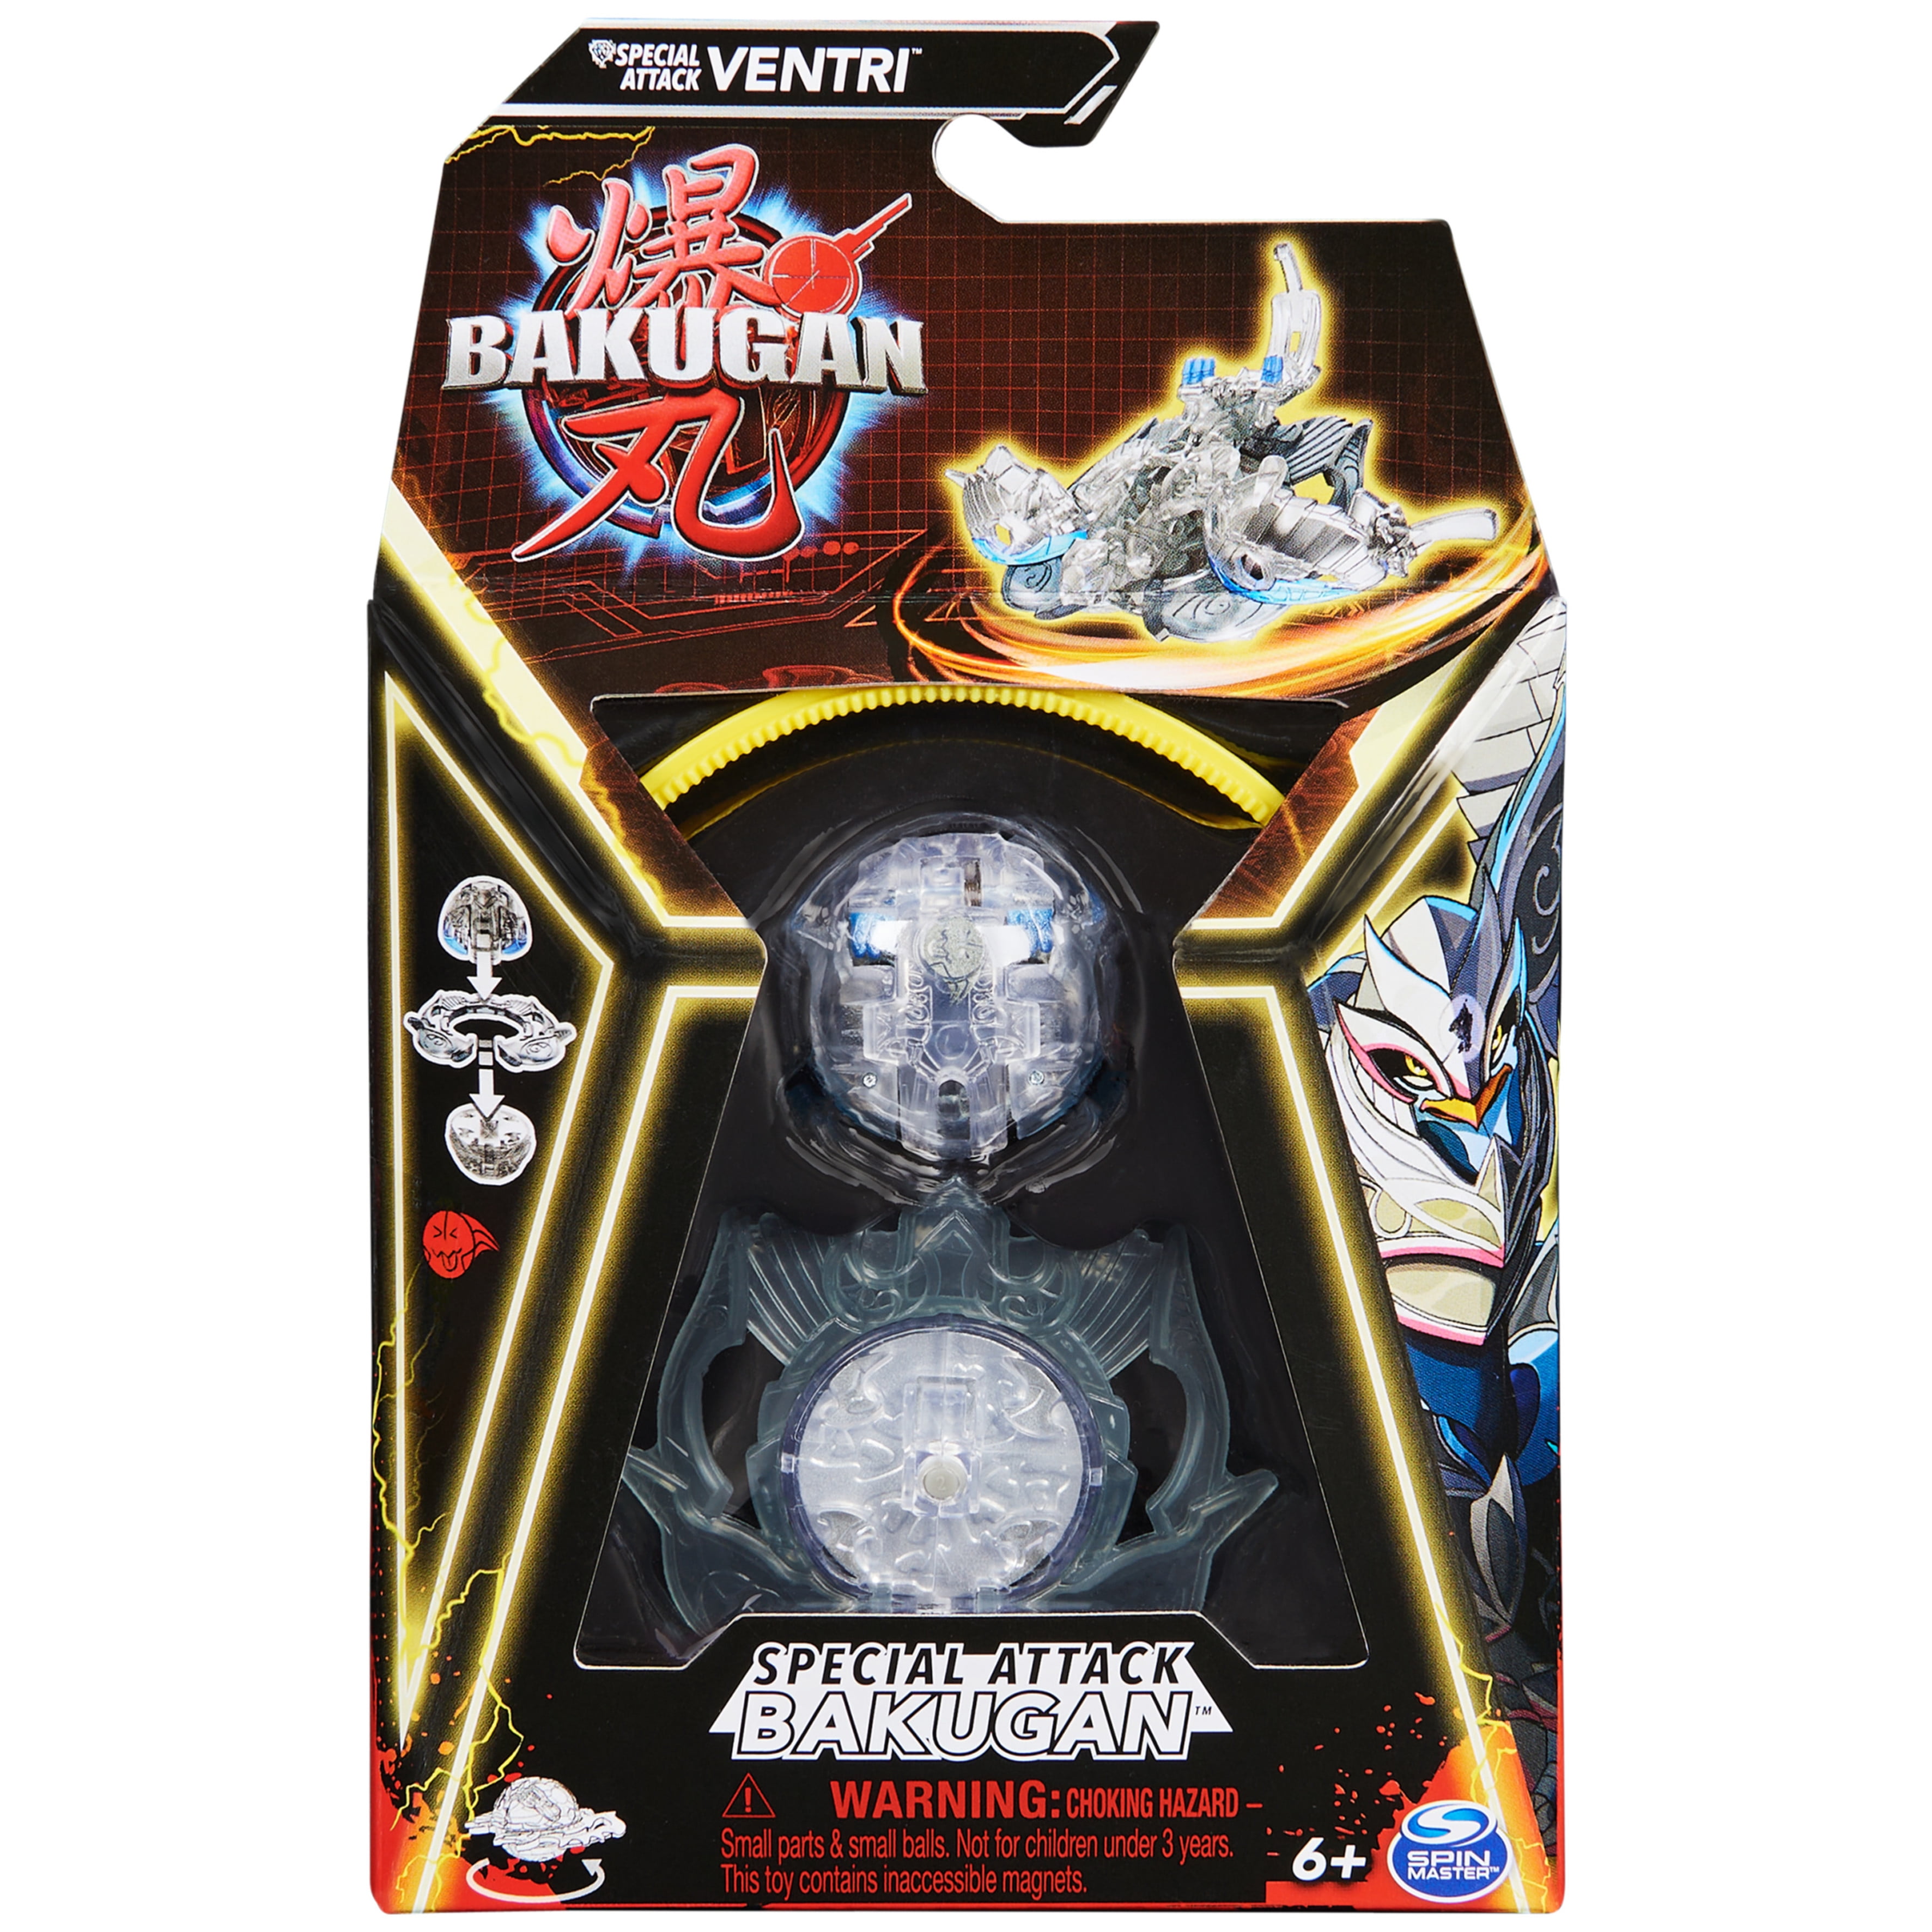 its tine to improve the bakugan legacy game! What woud you do? : r